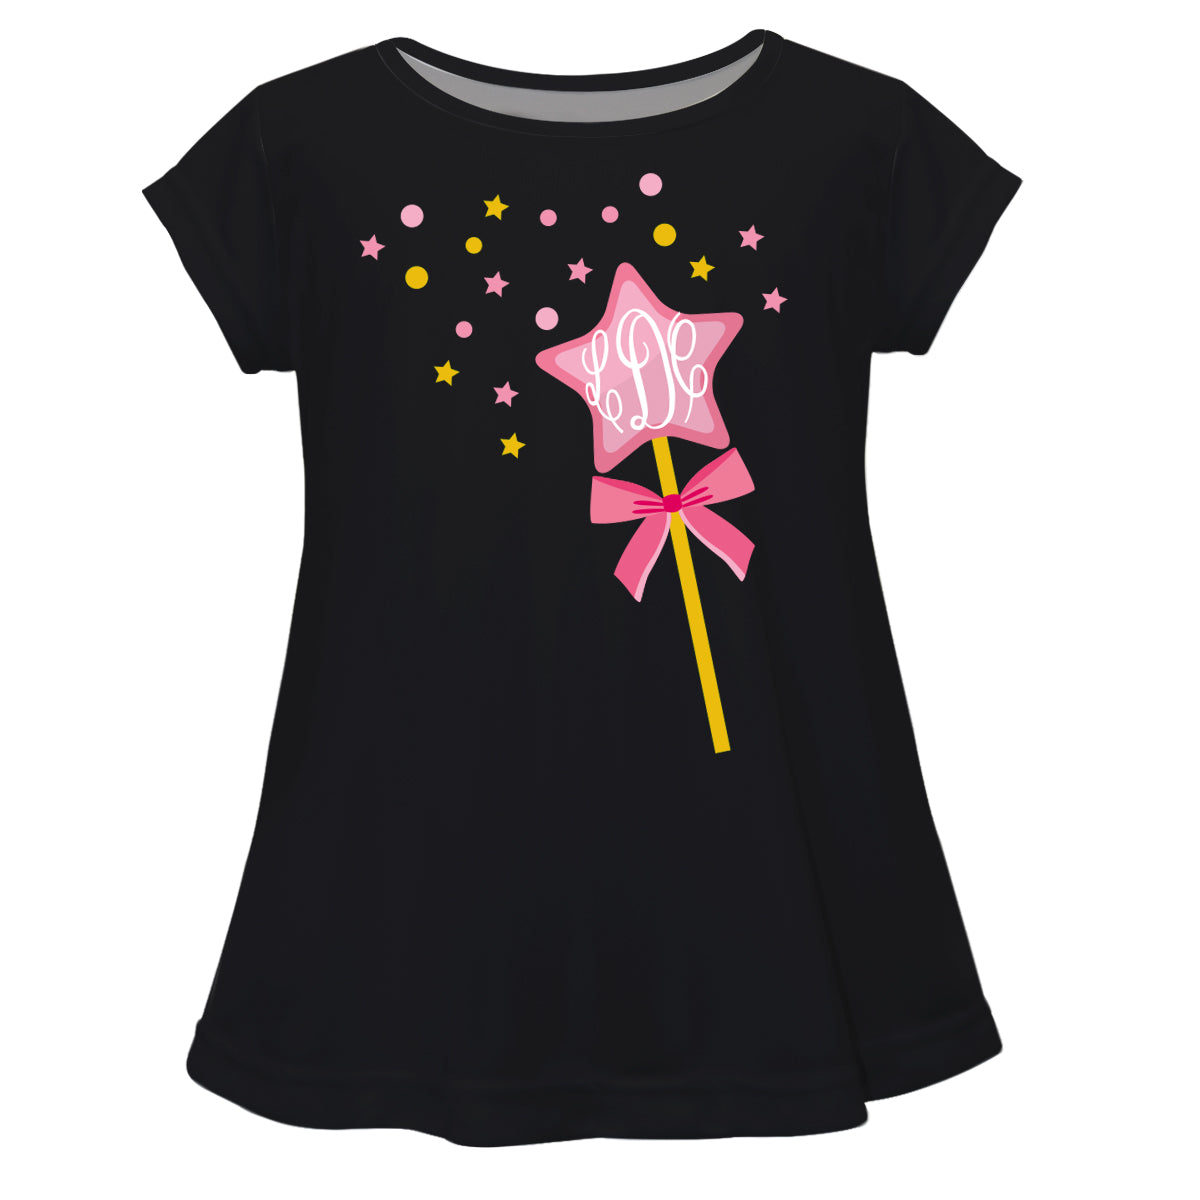 Magic Wand and Personalized Monogram Black Short Sleeve Laurie Top - Wimziy&Co.